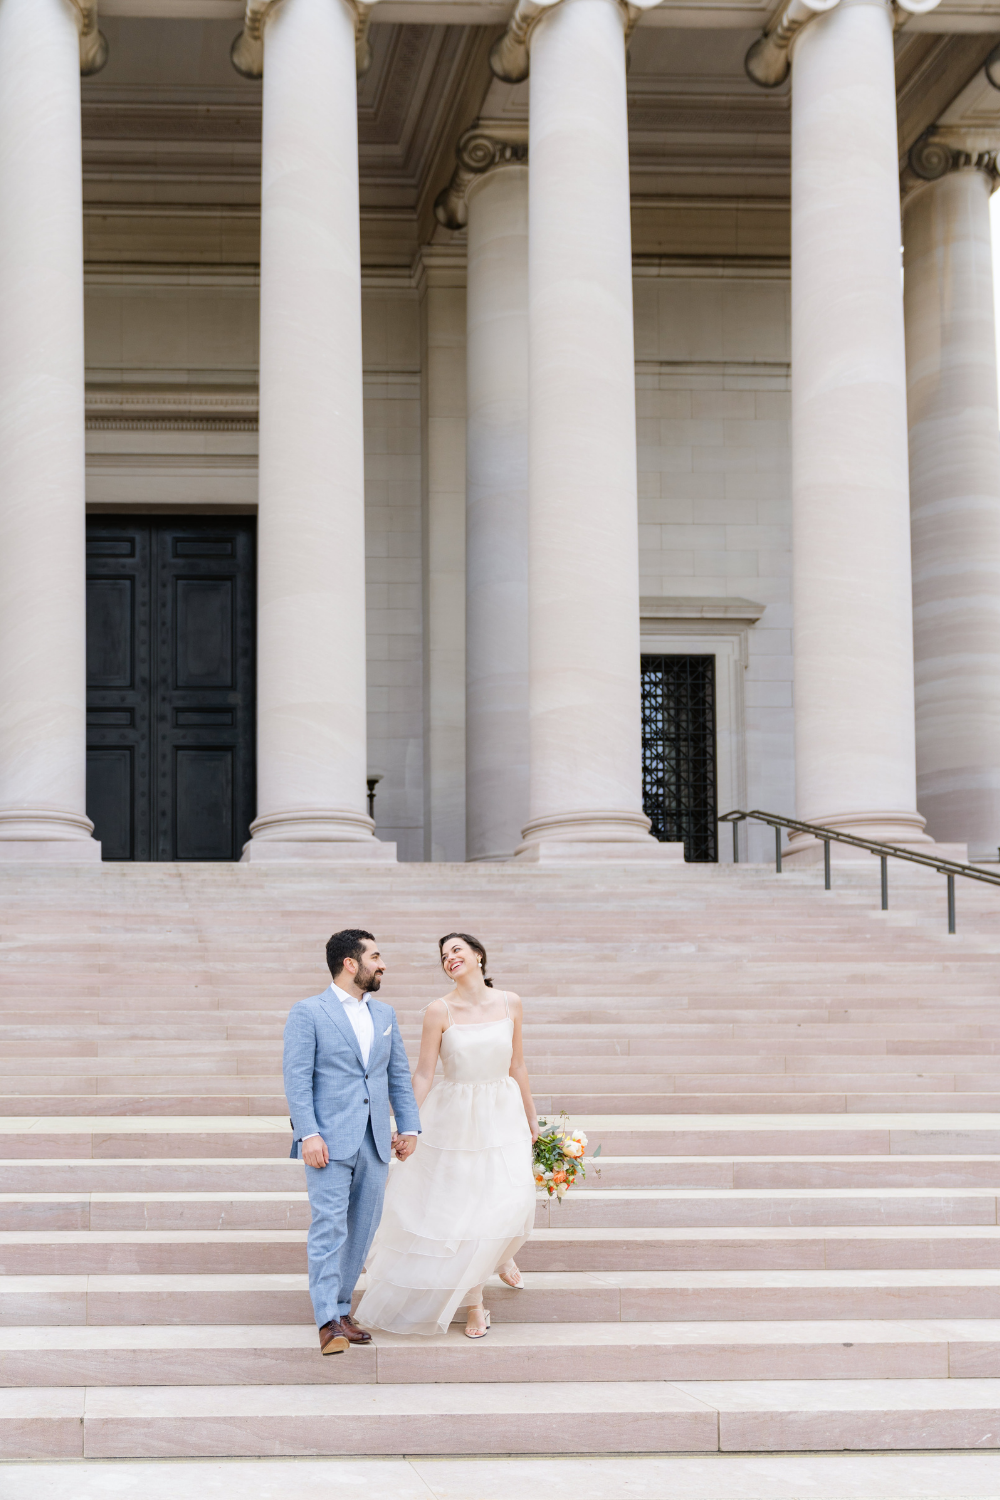 Bride and groom photography at Charlotte wedding